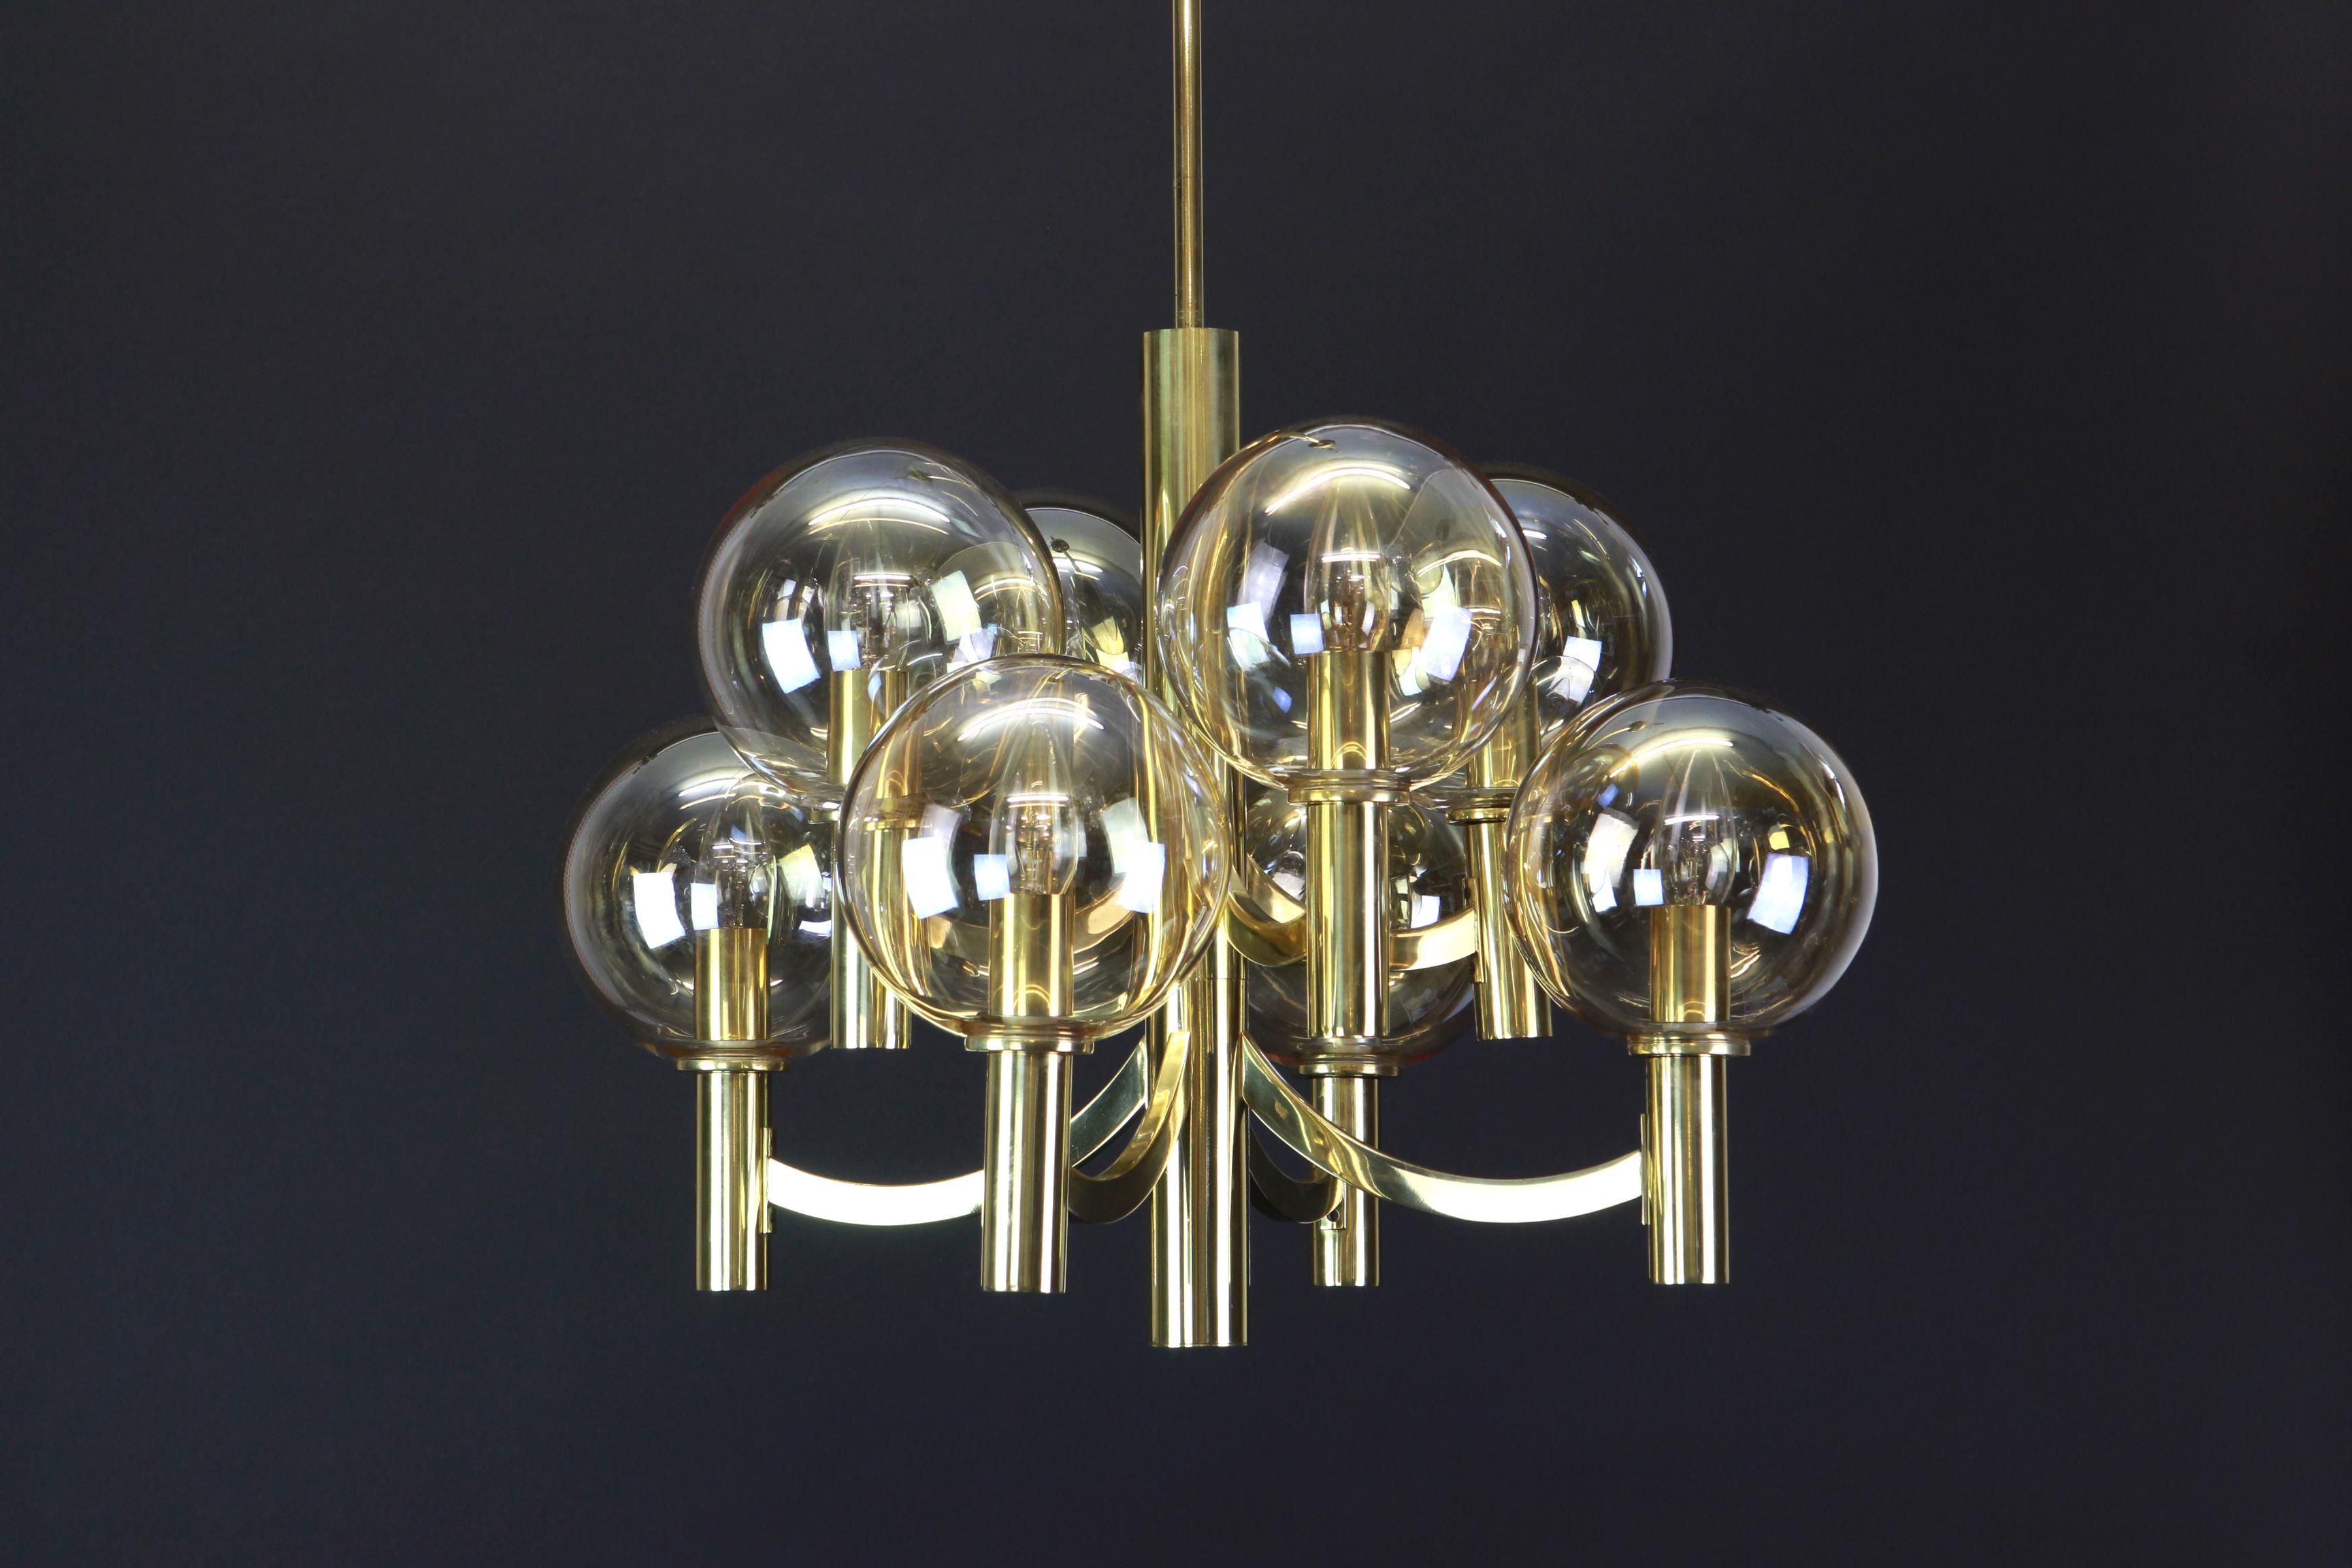 Stunning Sputnik brass chandelier with eight smoked glass globes by Kaiser Leuchten, Germany, 1960s.

Heavy quality and in very good condition. Cleaned, well-wired and ready to use. 

The fixture requires eight E14 Small bulbs with 40W max